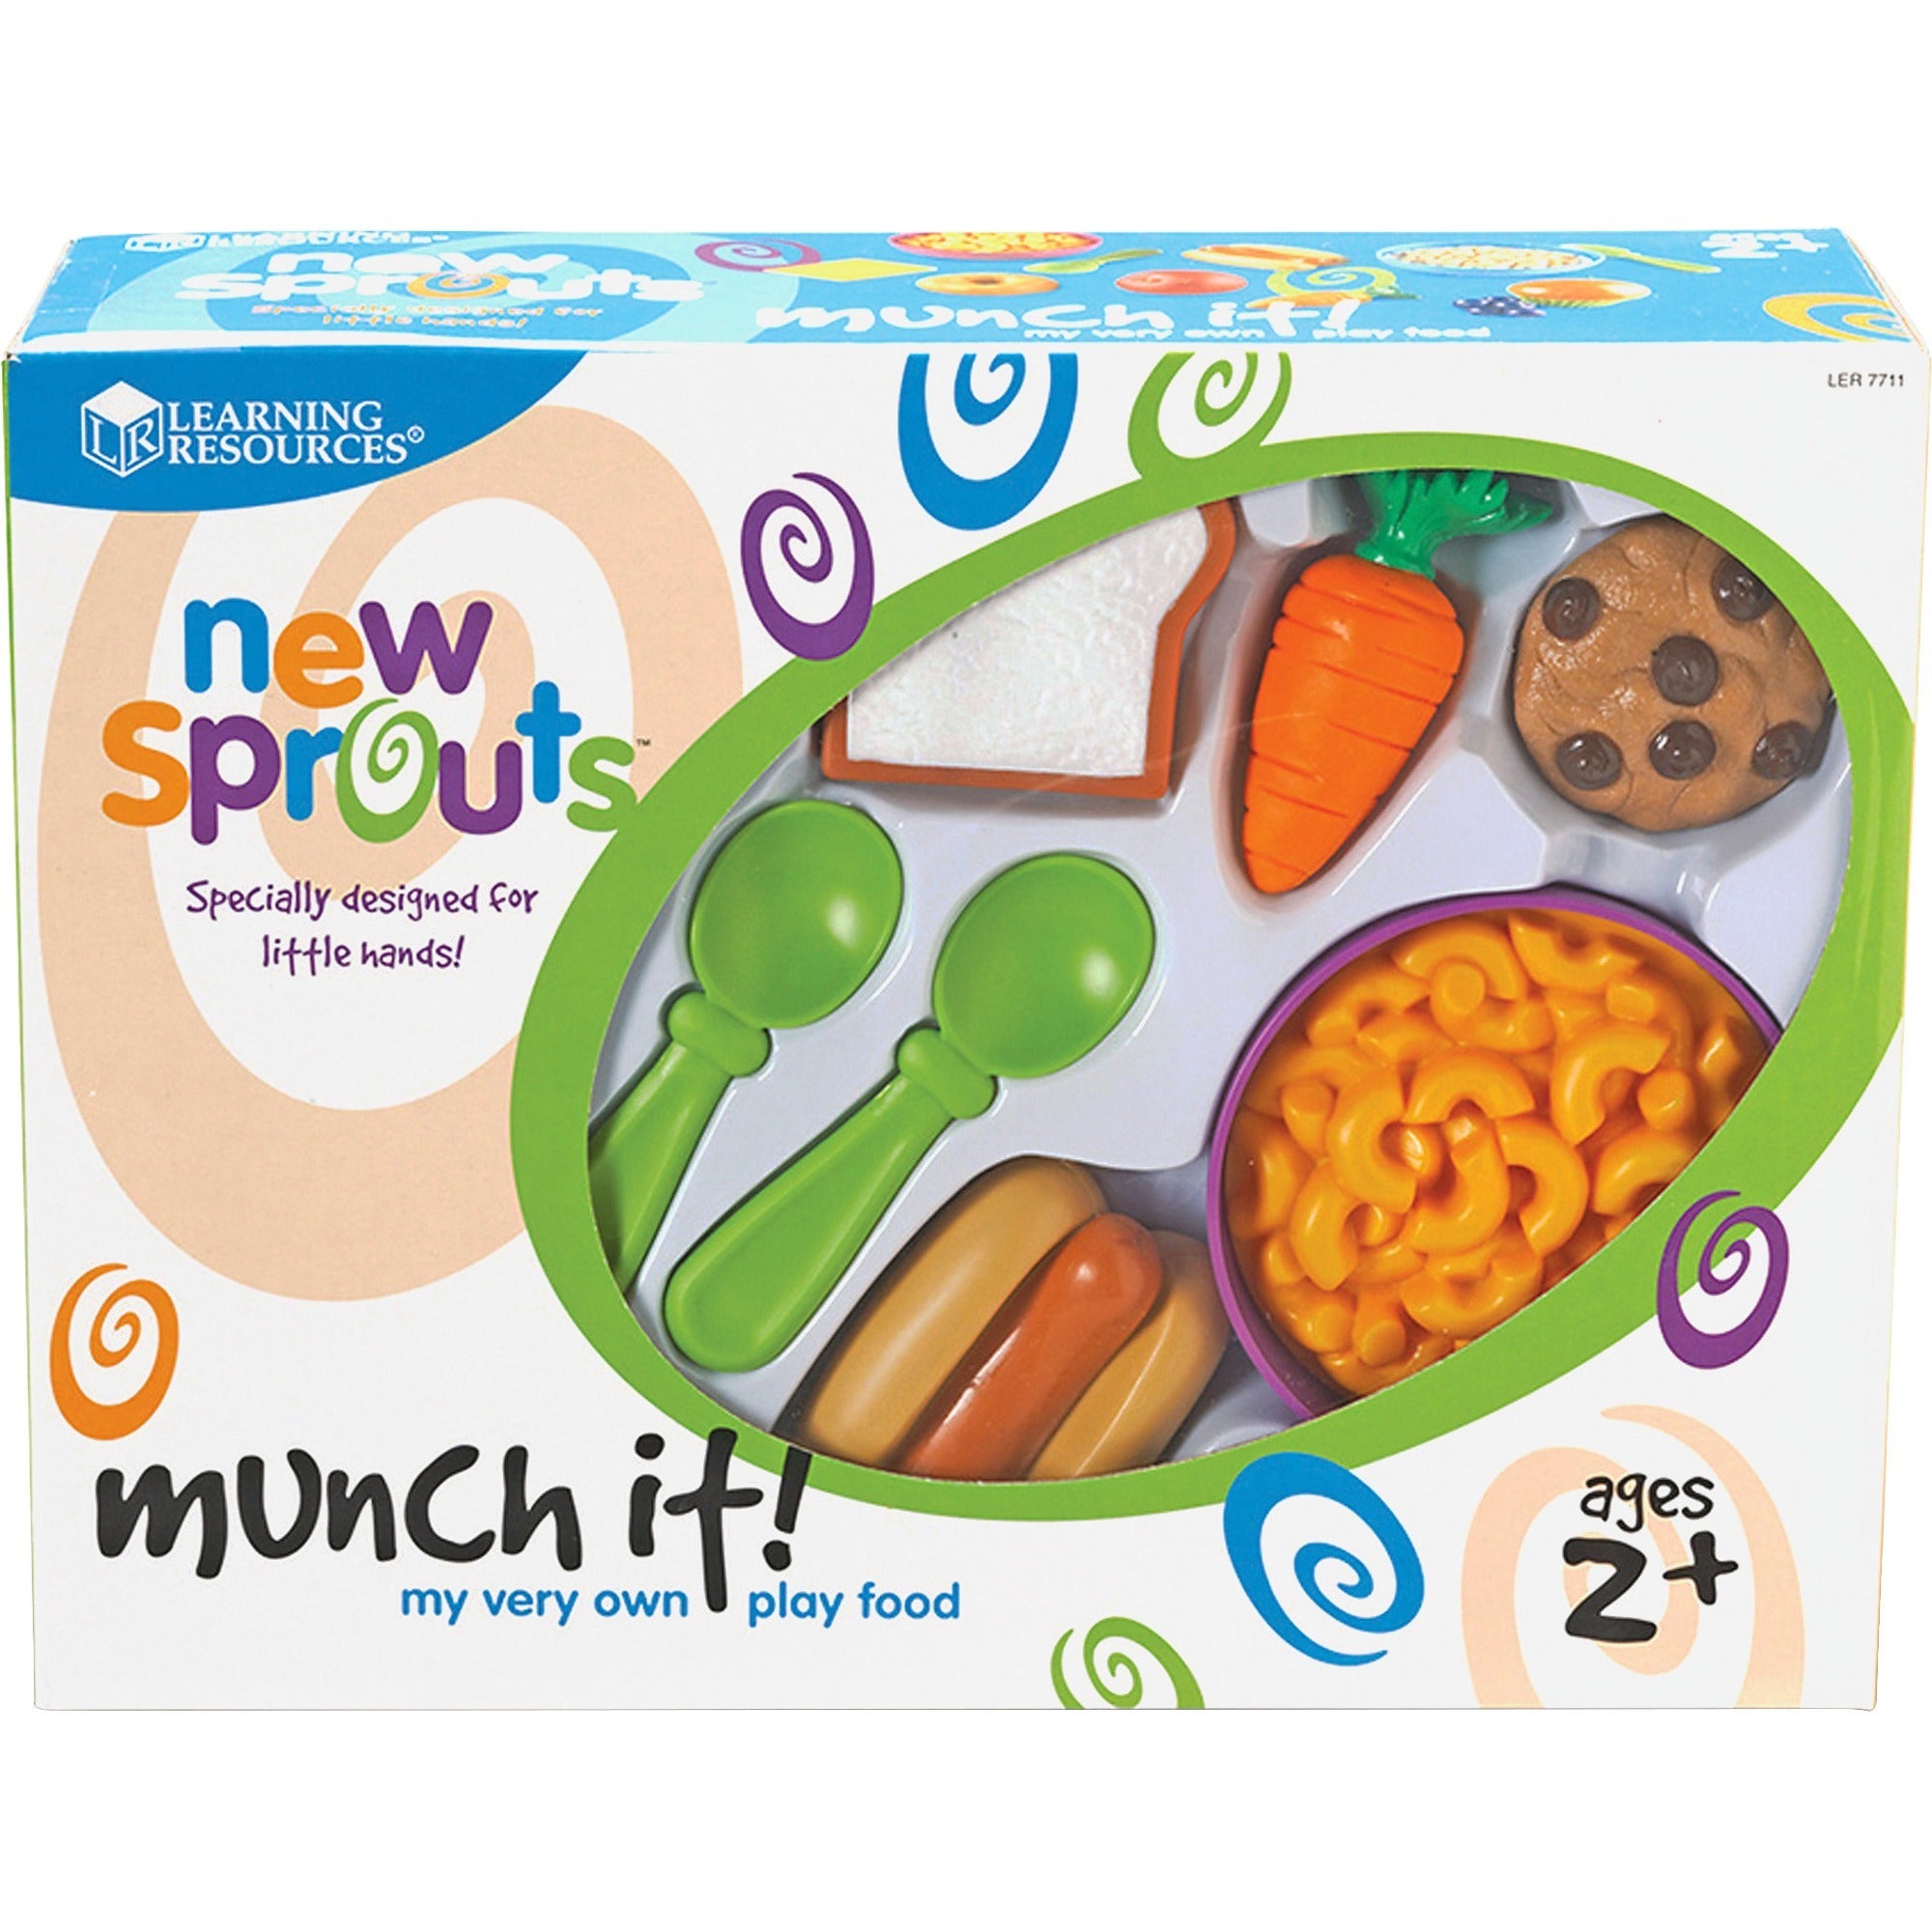 New Sprouts - Munch It! Play Food Set - 1 / Set - 2 Year to 6 Year - Plastic - 